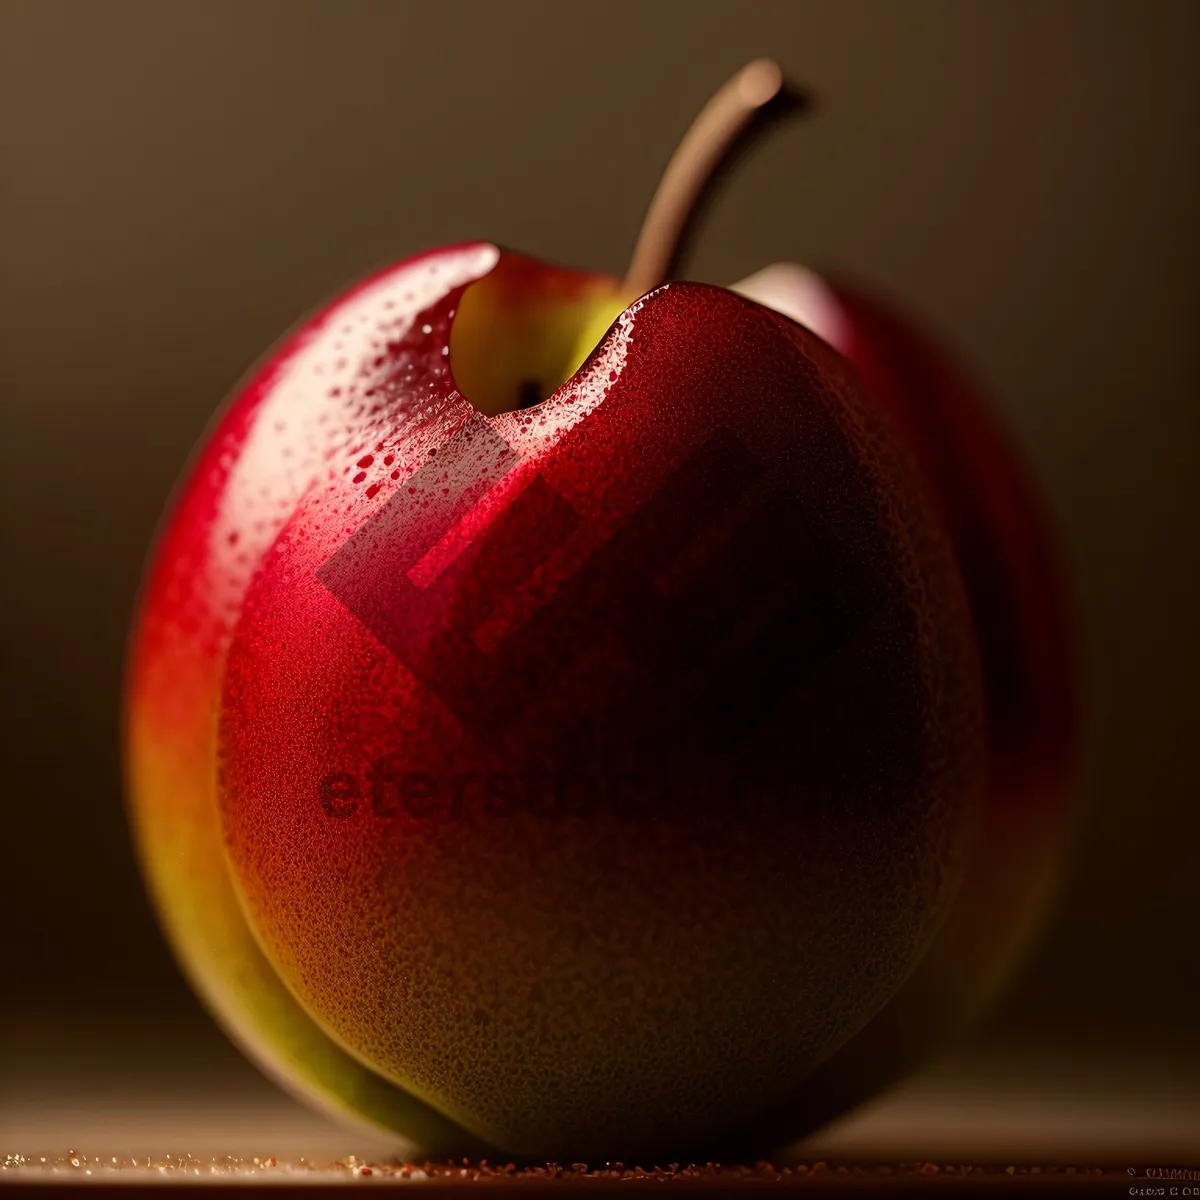 Picture of Juicy Red Apple: Delicious, Fresh, and Nutritious!